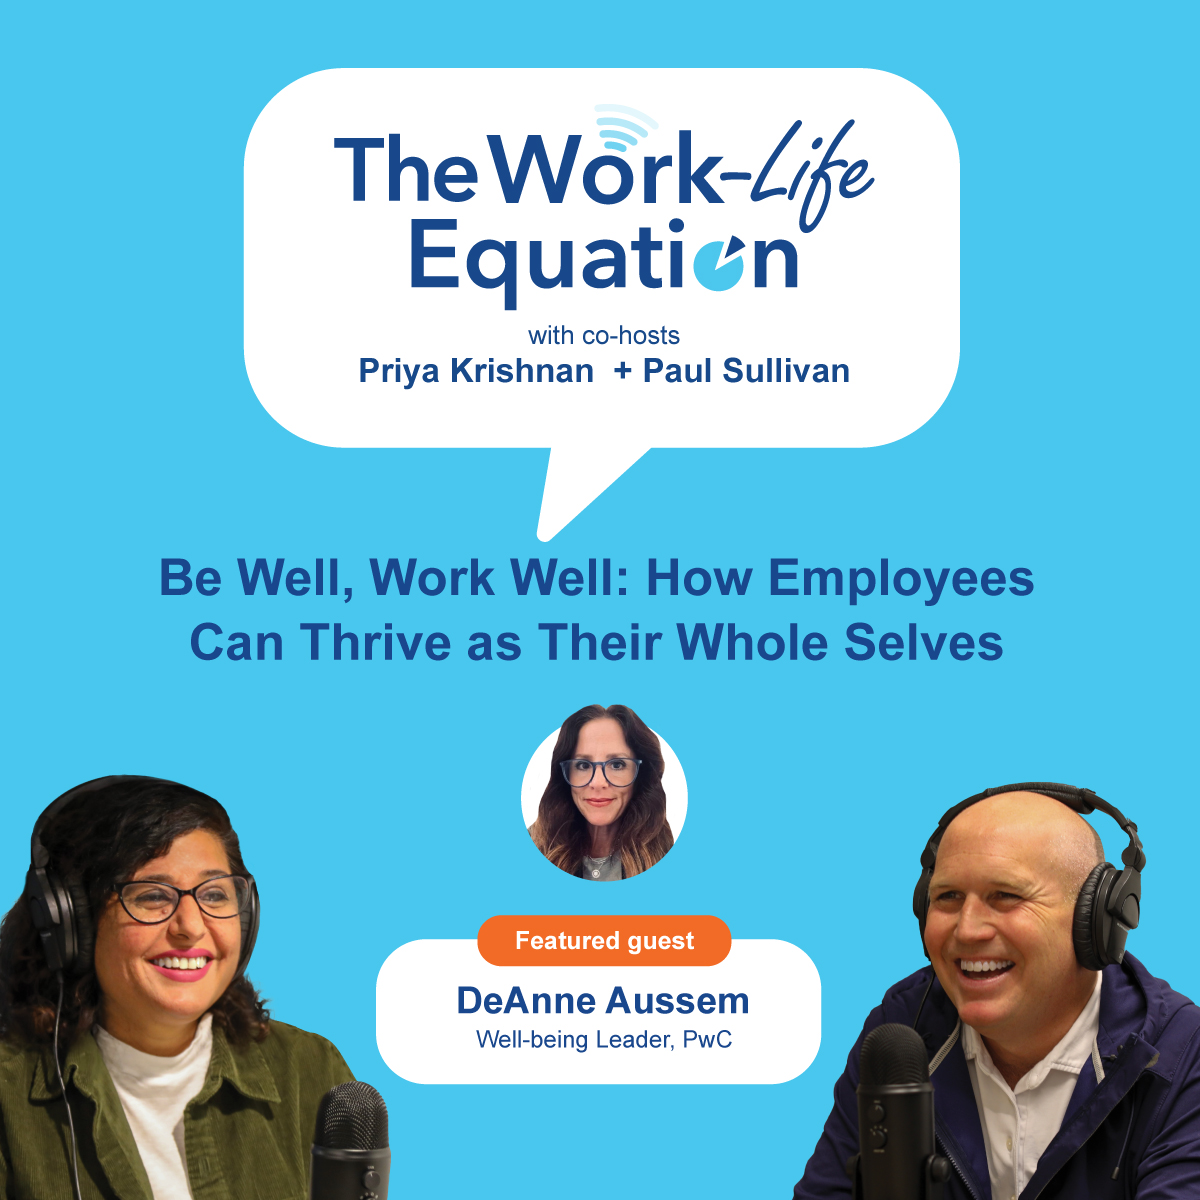 Episode 8 of the Work-Life Equation podcast